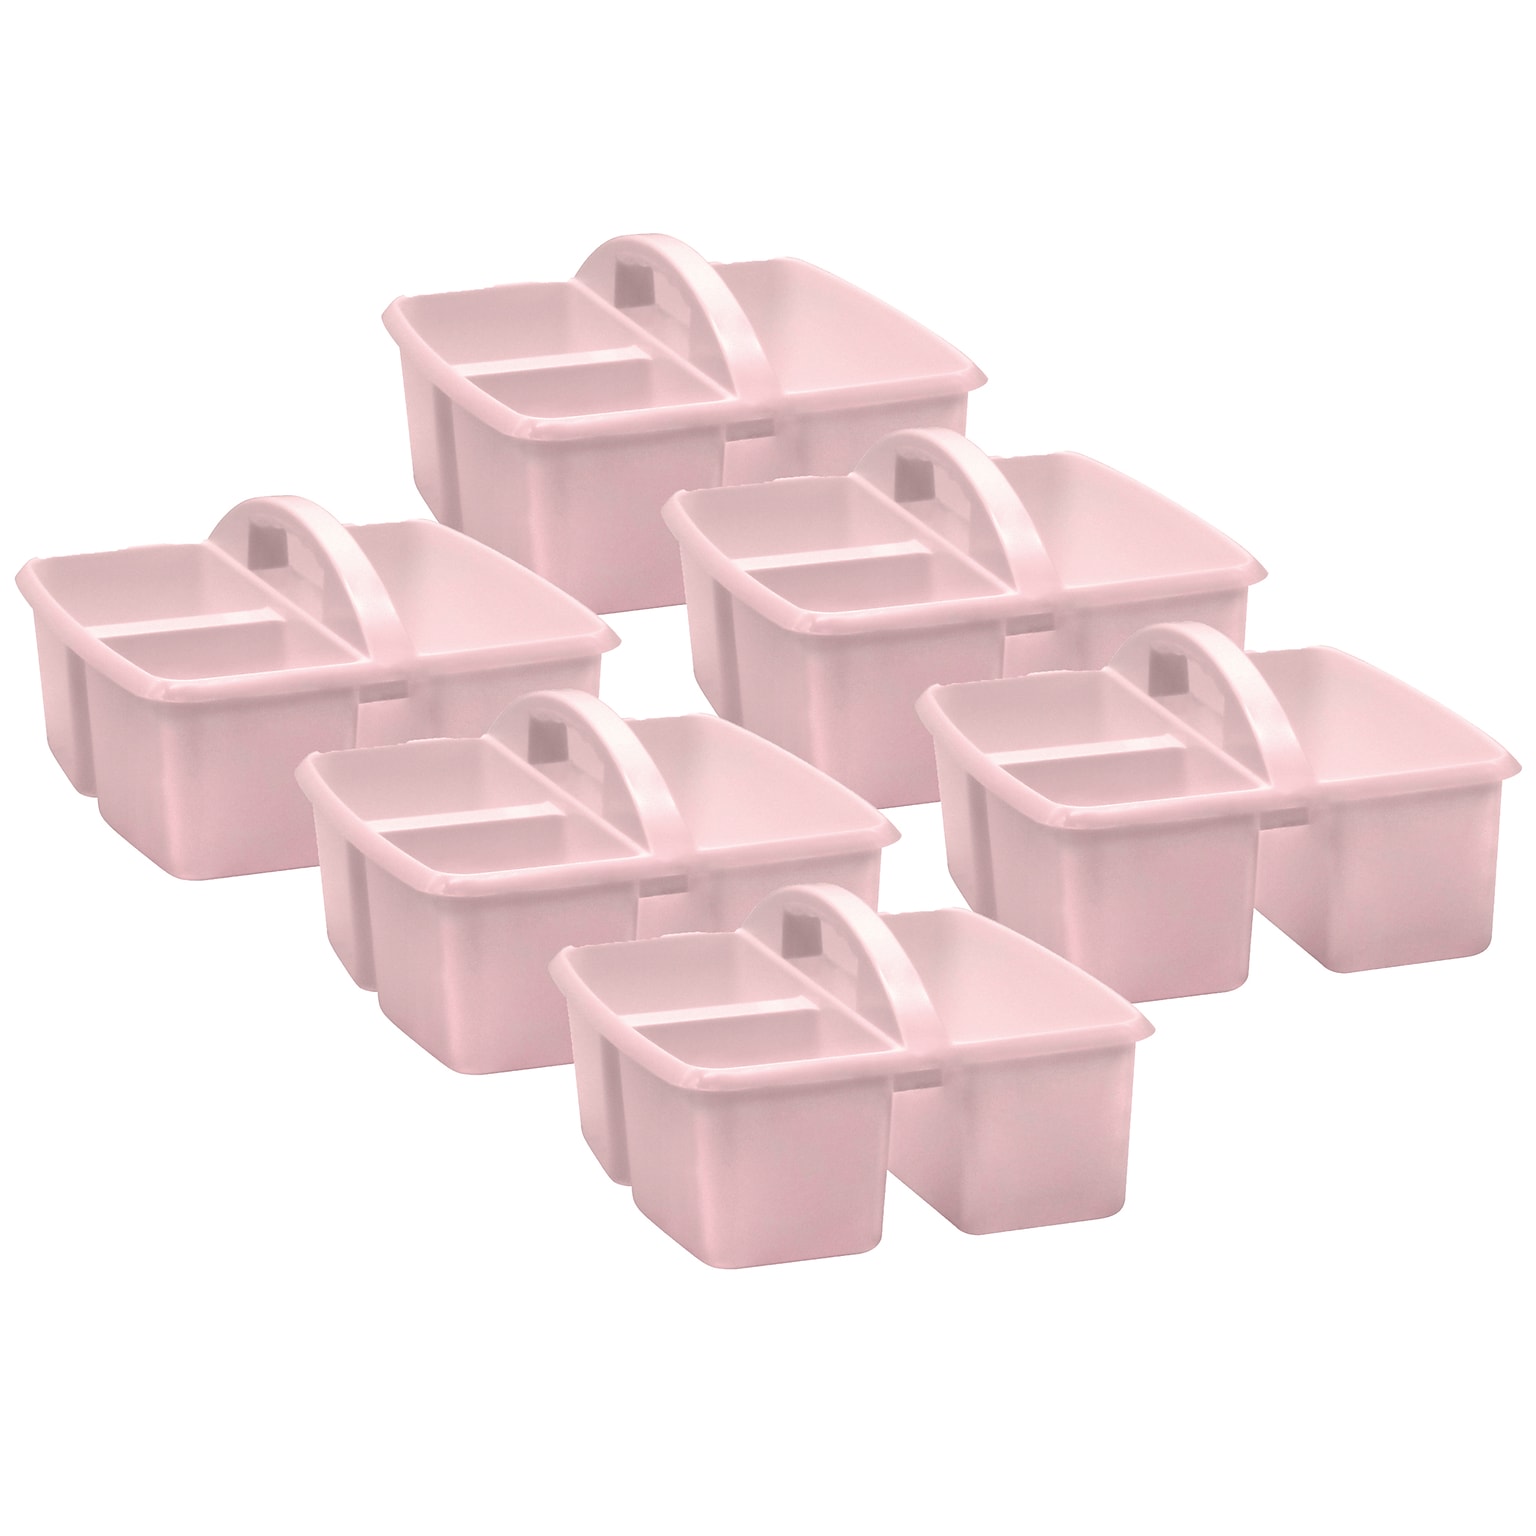 Teacher Created Resources® Plastic Storage Caddy, 9 x 9.25 x 5.25, Pink Blush, Pack of 6 (TCR20444-6)